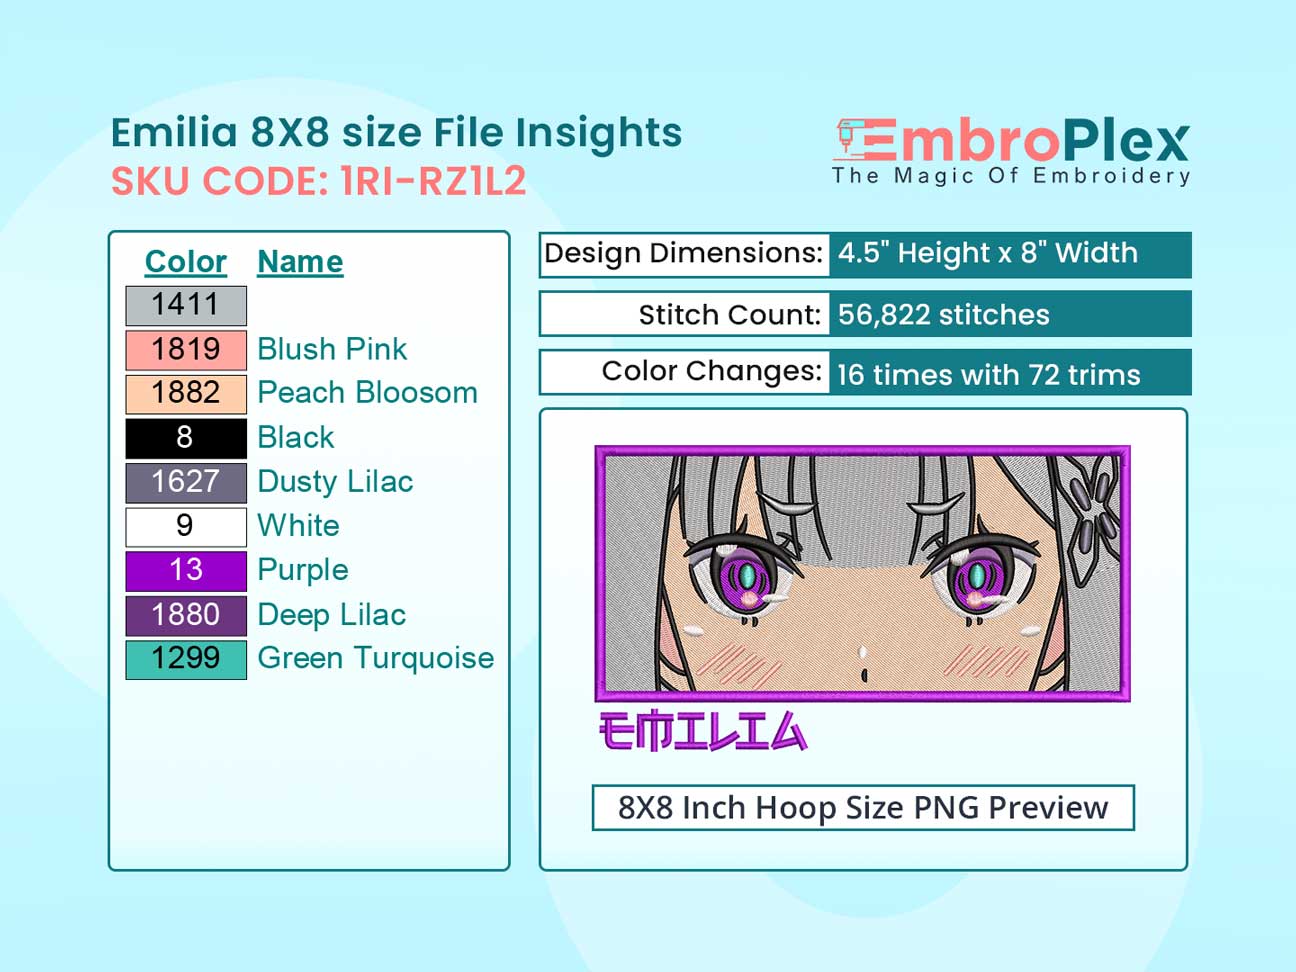 Anime-Inspired Emilia Embroidery Design File - 8x8 Inch hoop Size Variation overview image